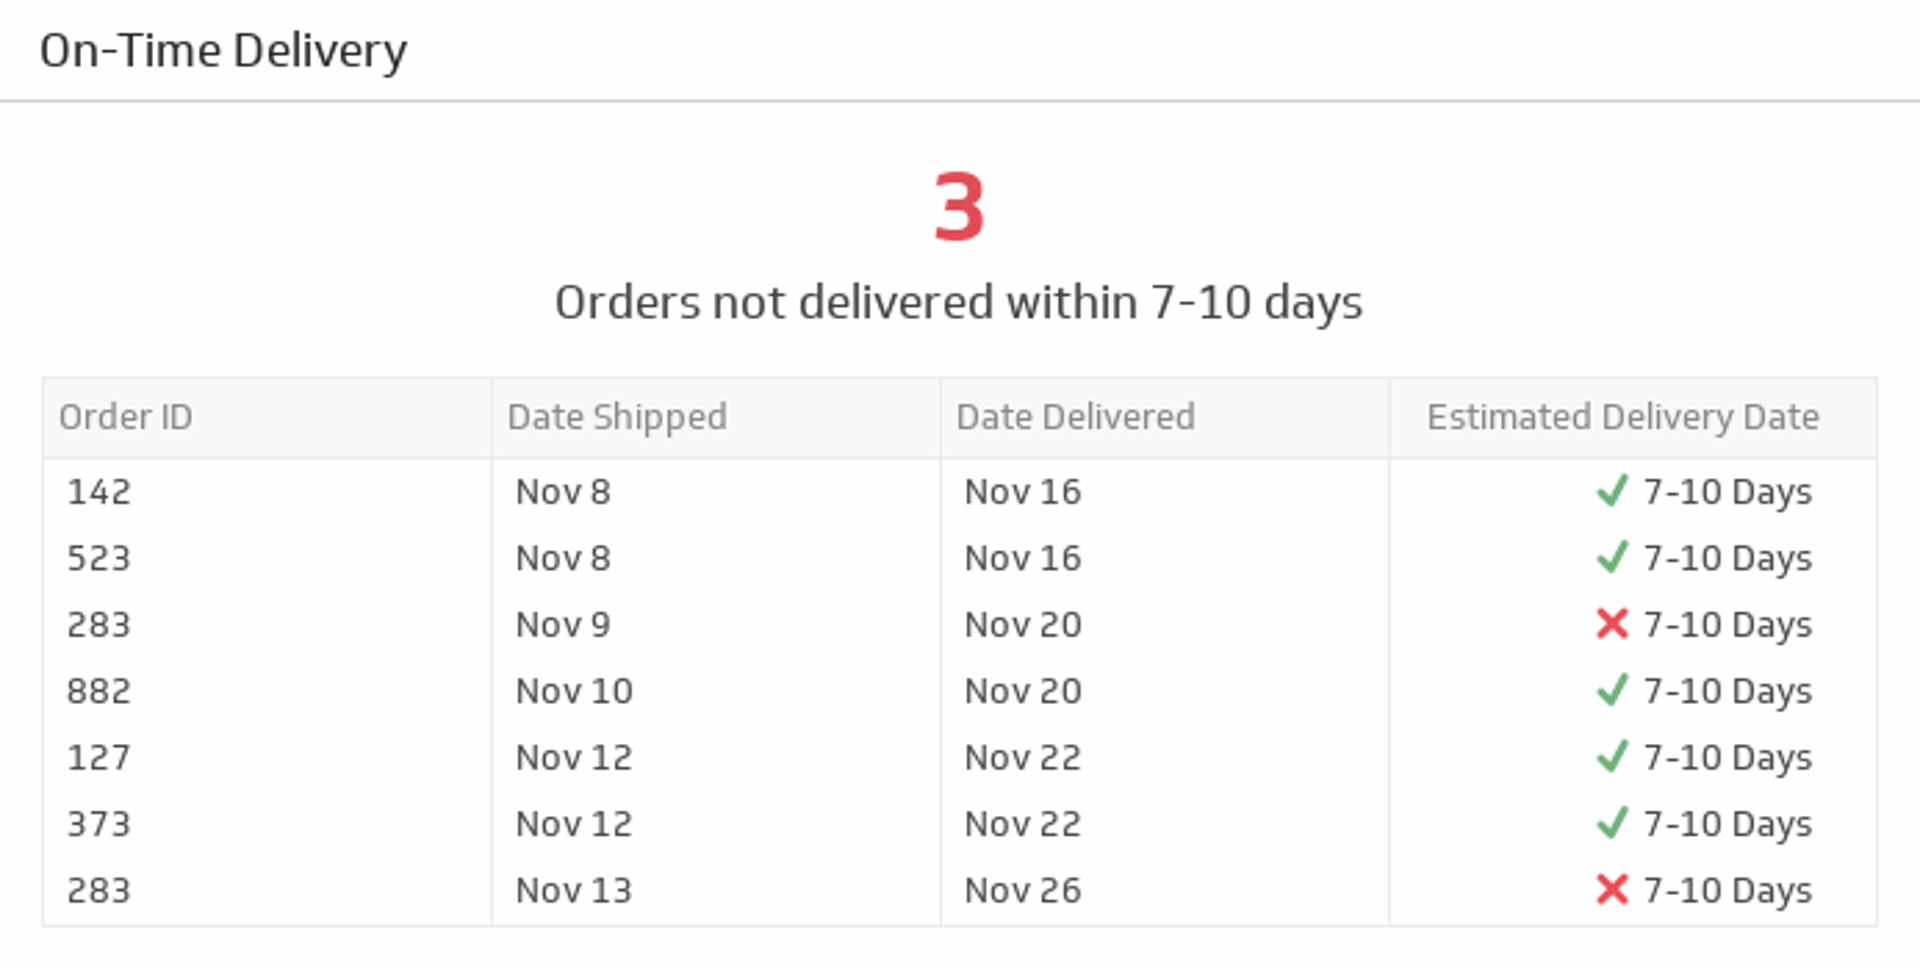 Ecommerce KPI Examples - On-Time Delivery Metric